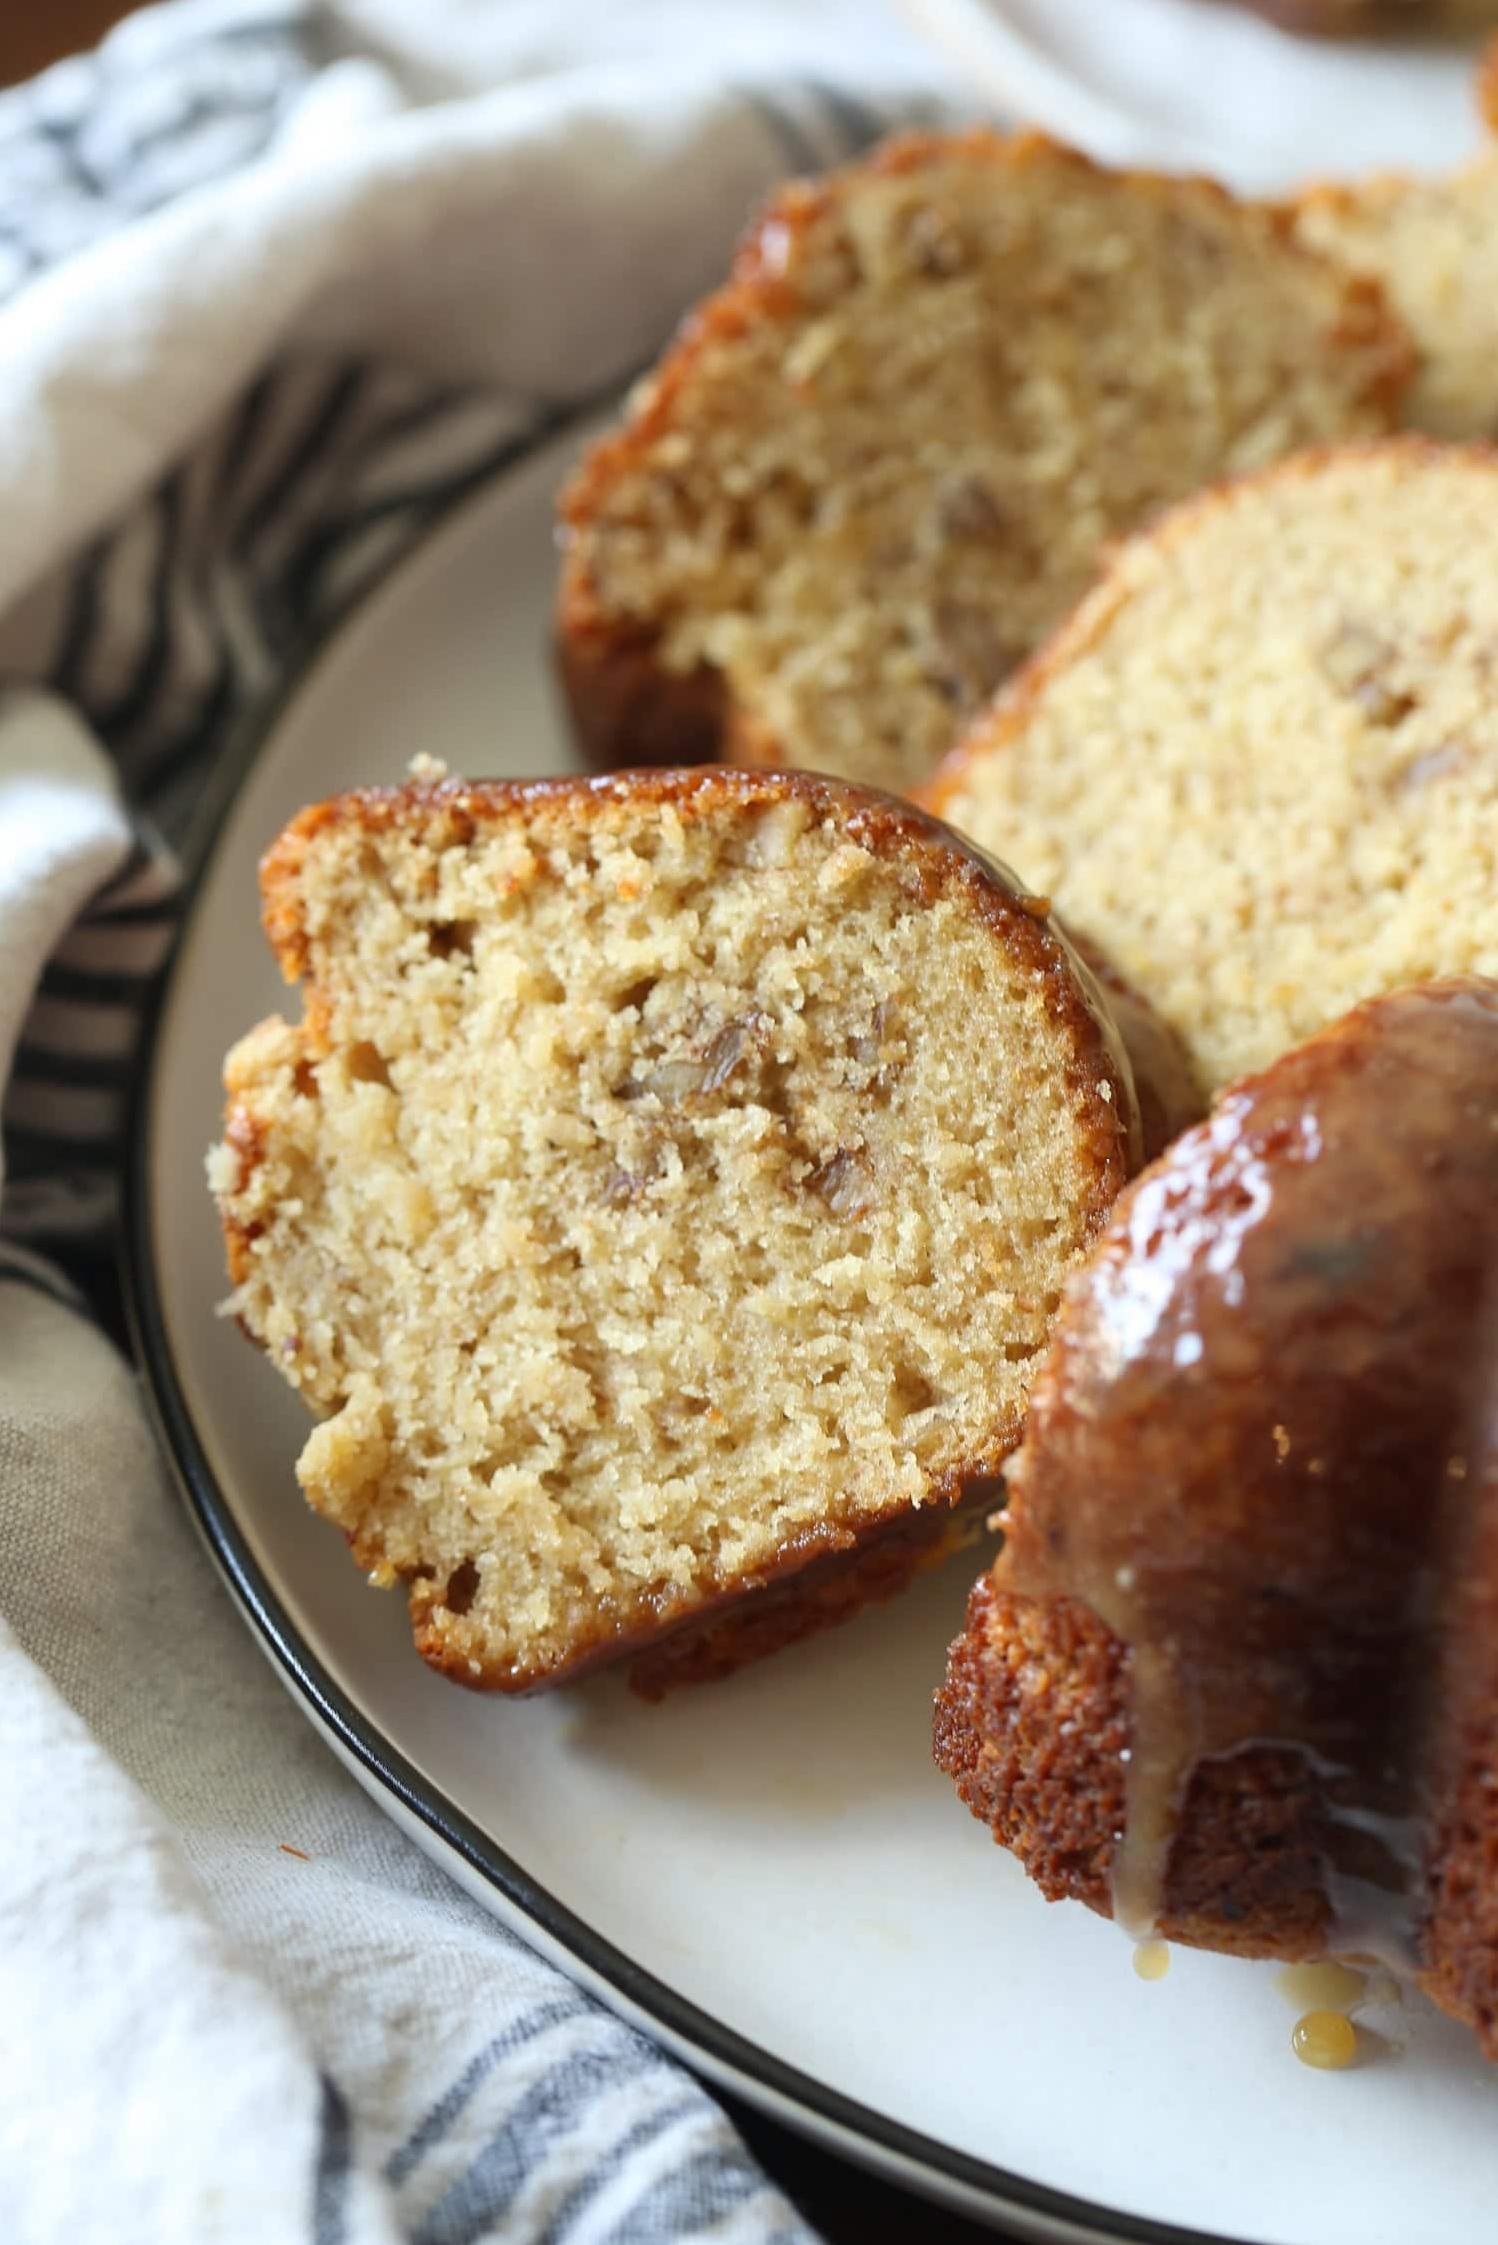  Sweet bananas add a delicious twist to classic pound cake.